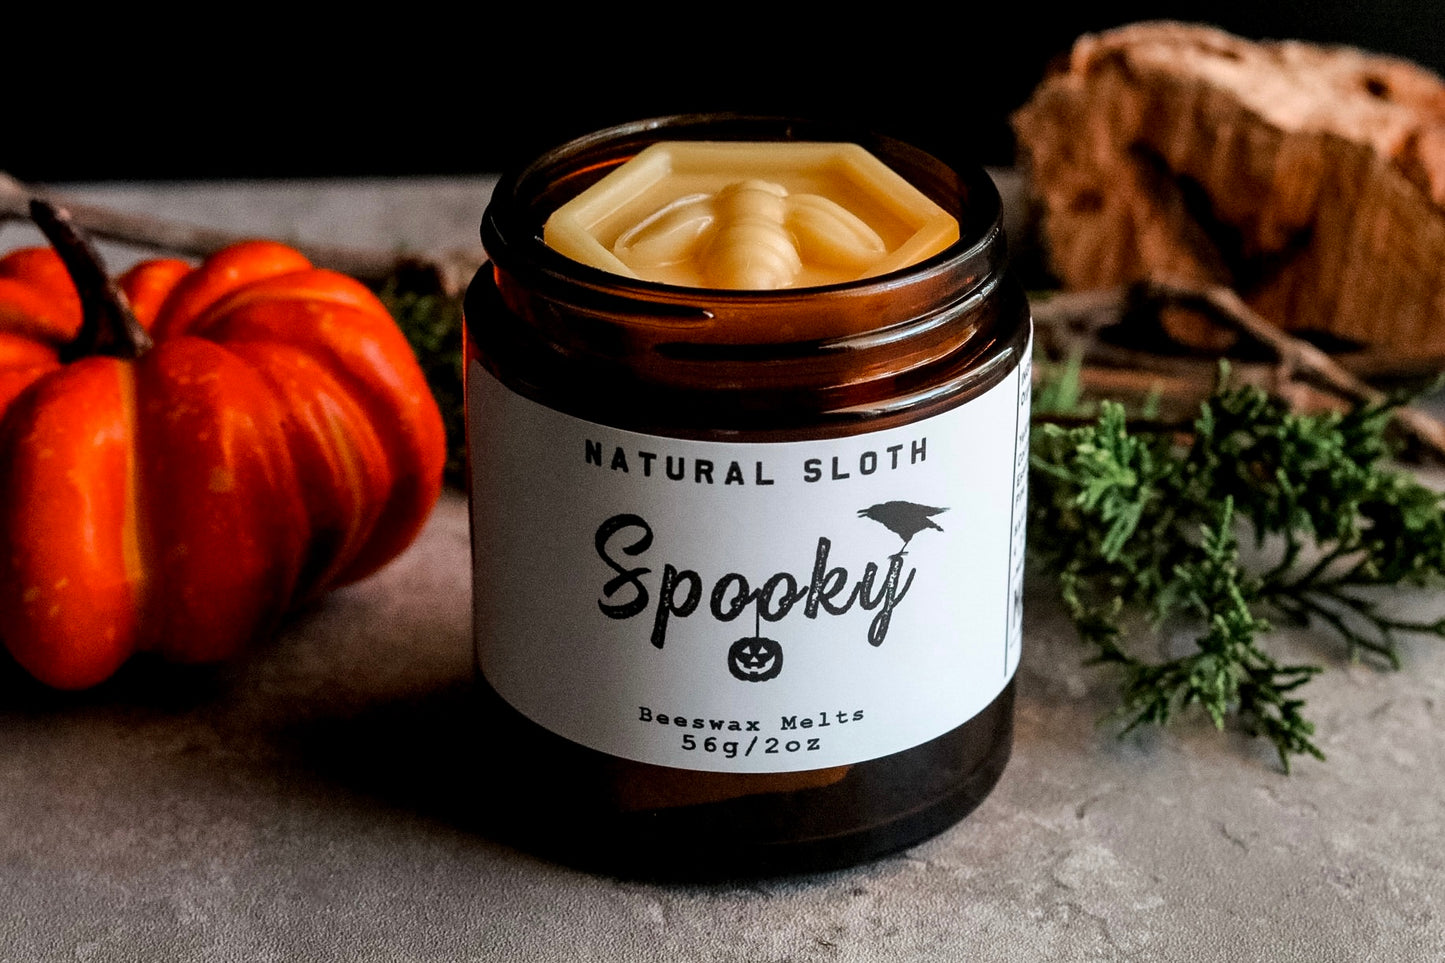 Spooky Beeswax Melts with Essential Oils